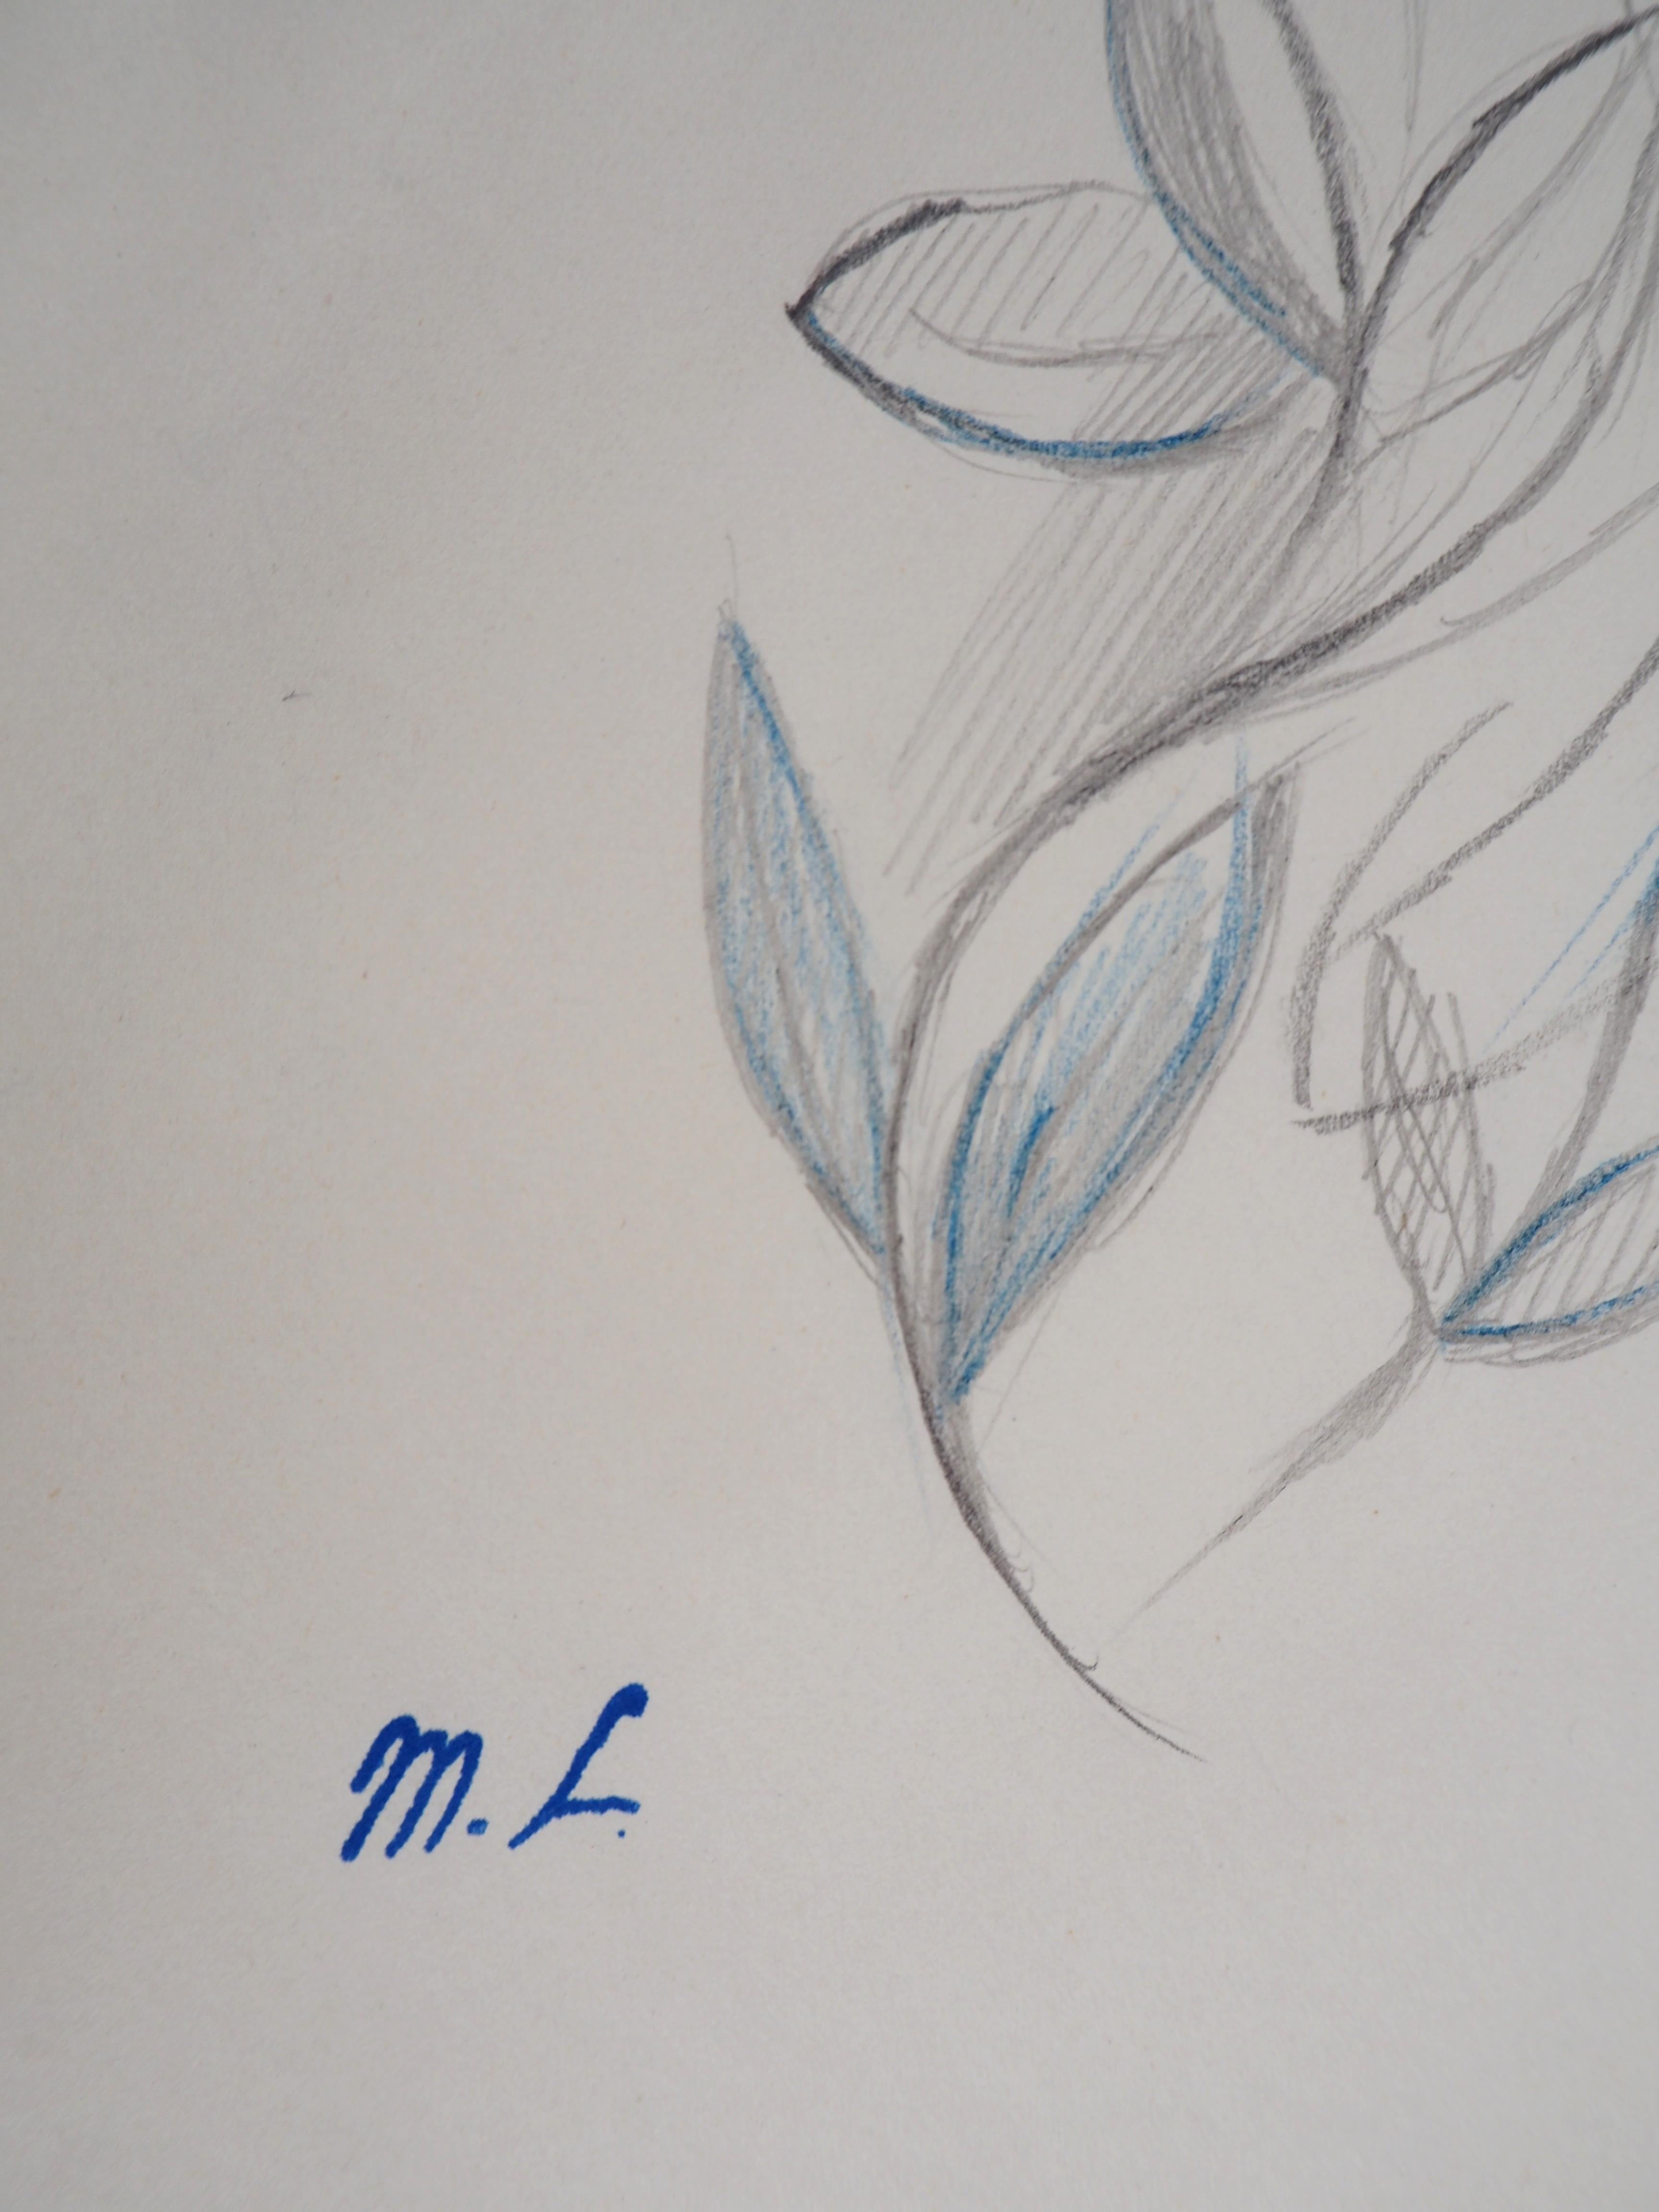 Spring Blossom : Leaves in Blue - Original pencil drawing, 1953 - Art by Marie Laurencin